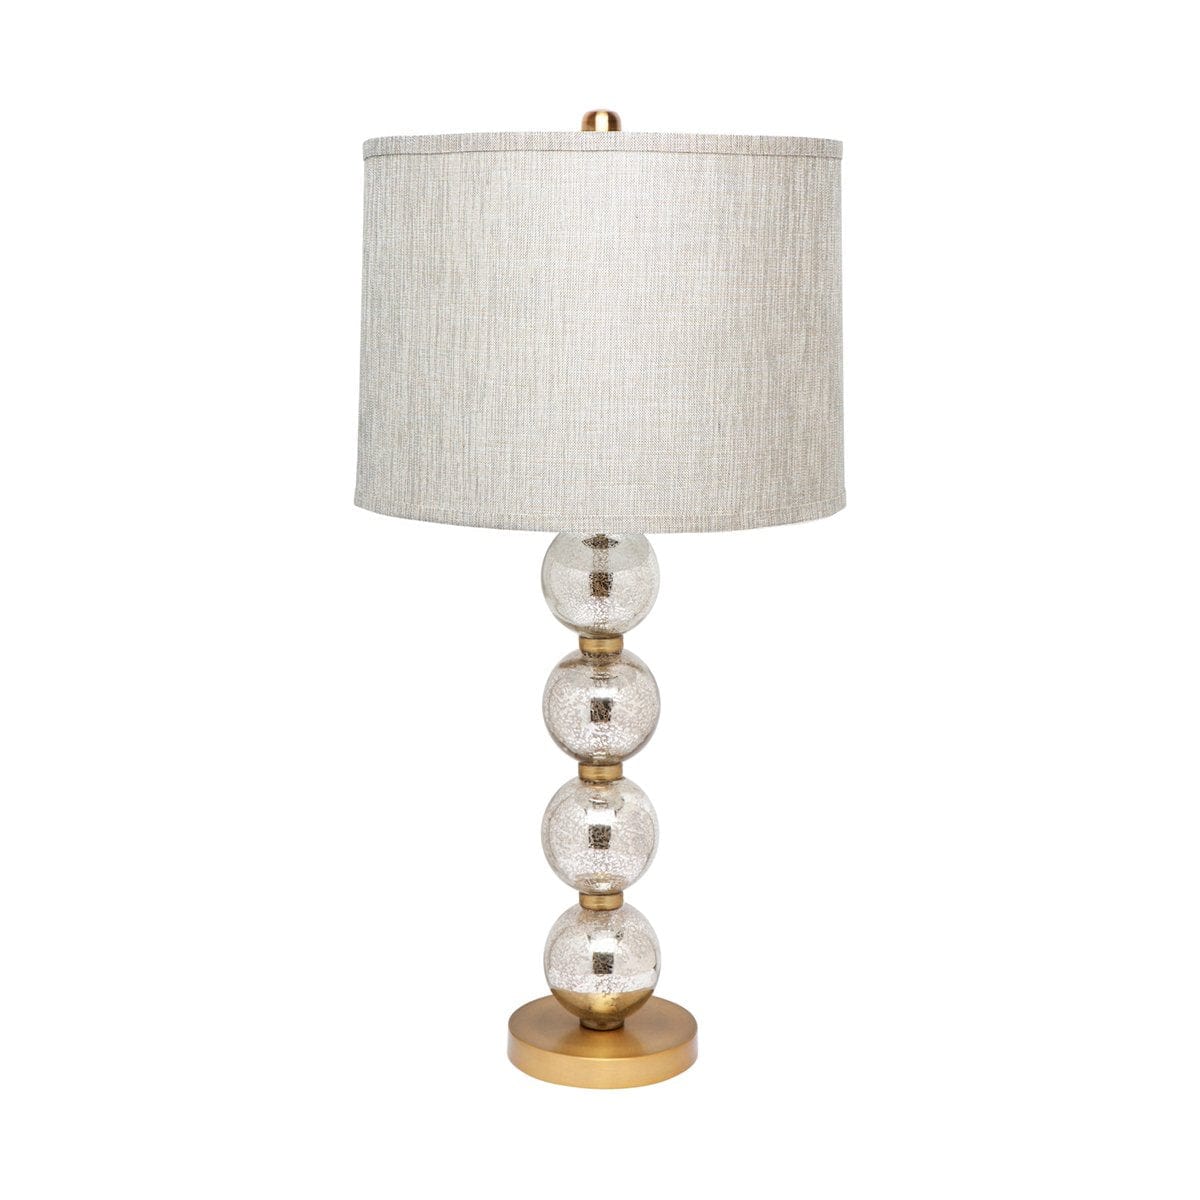 CAFE LIGHTING & LIVING Table Lamp Evie Table Lamp 11764